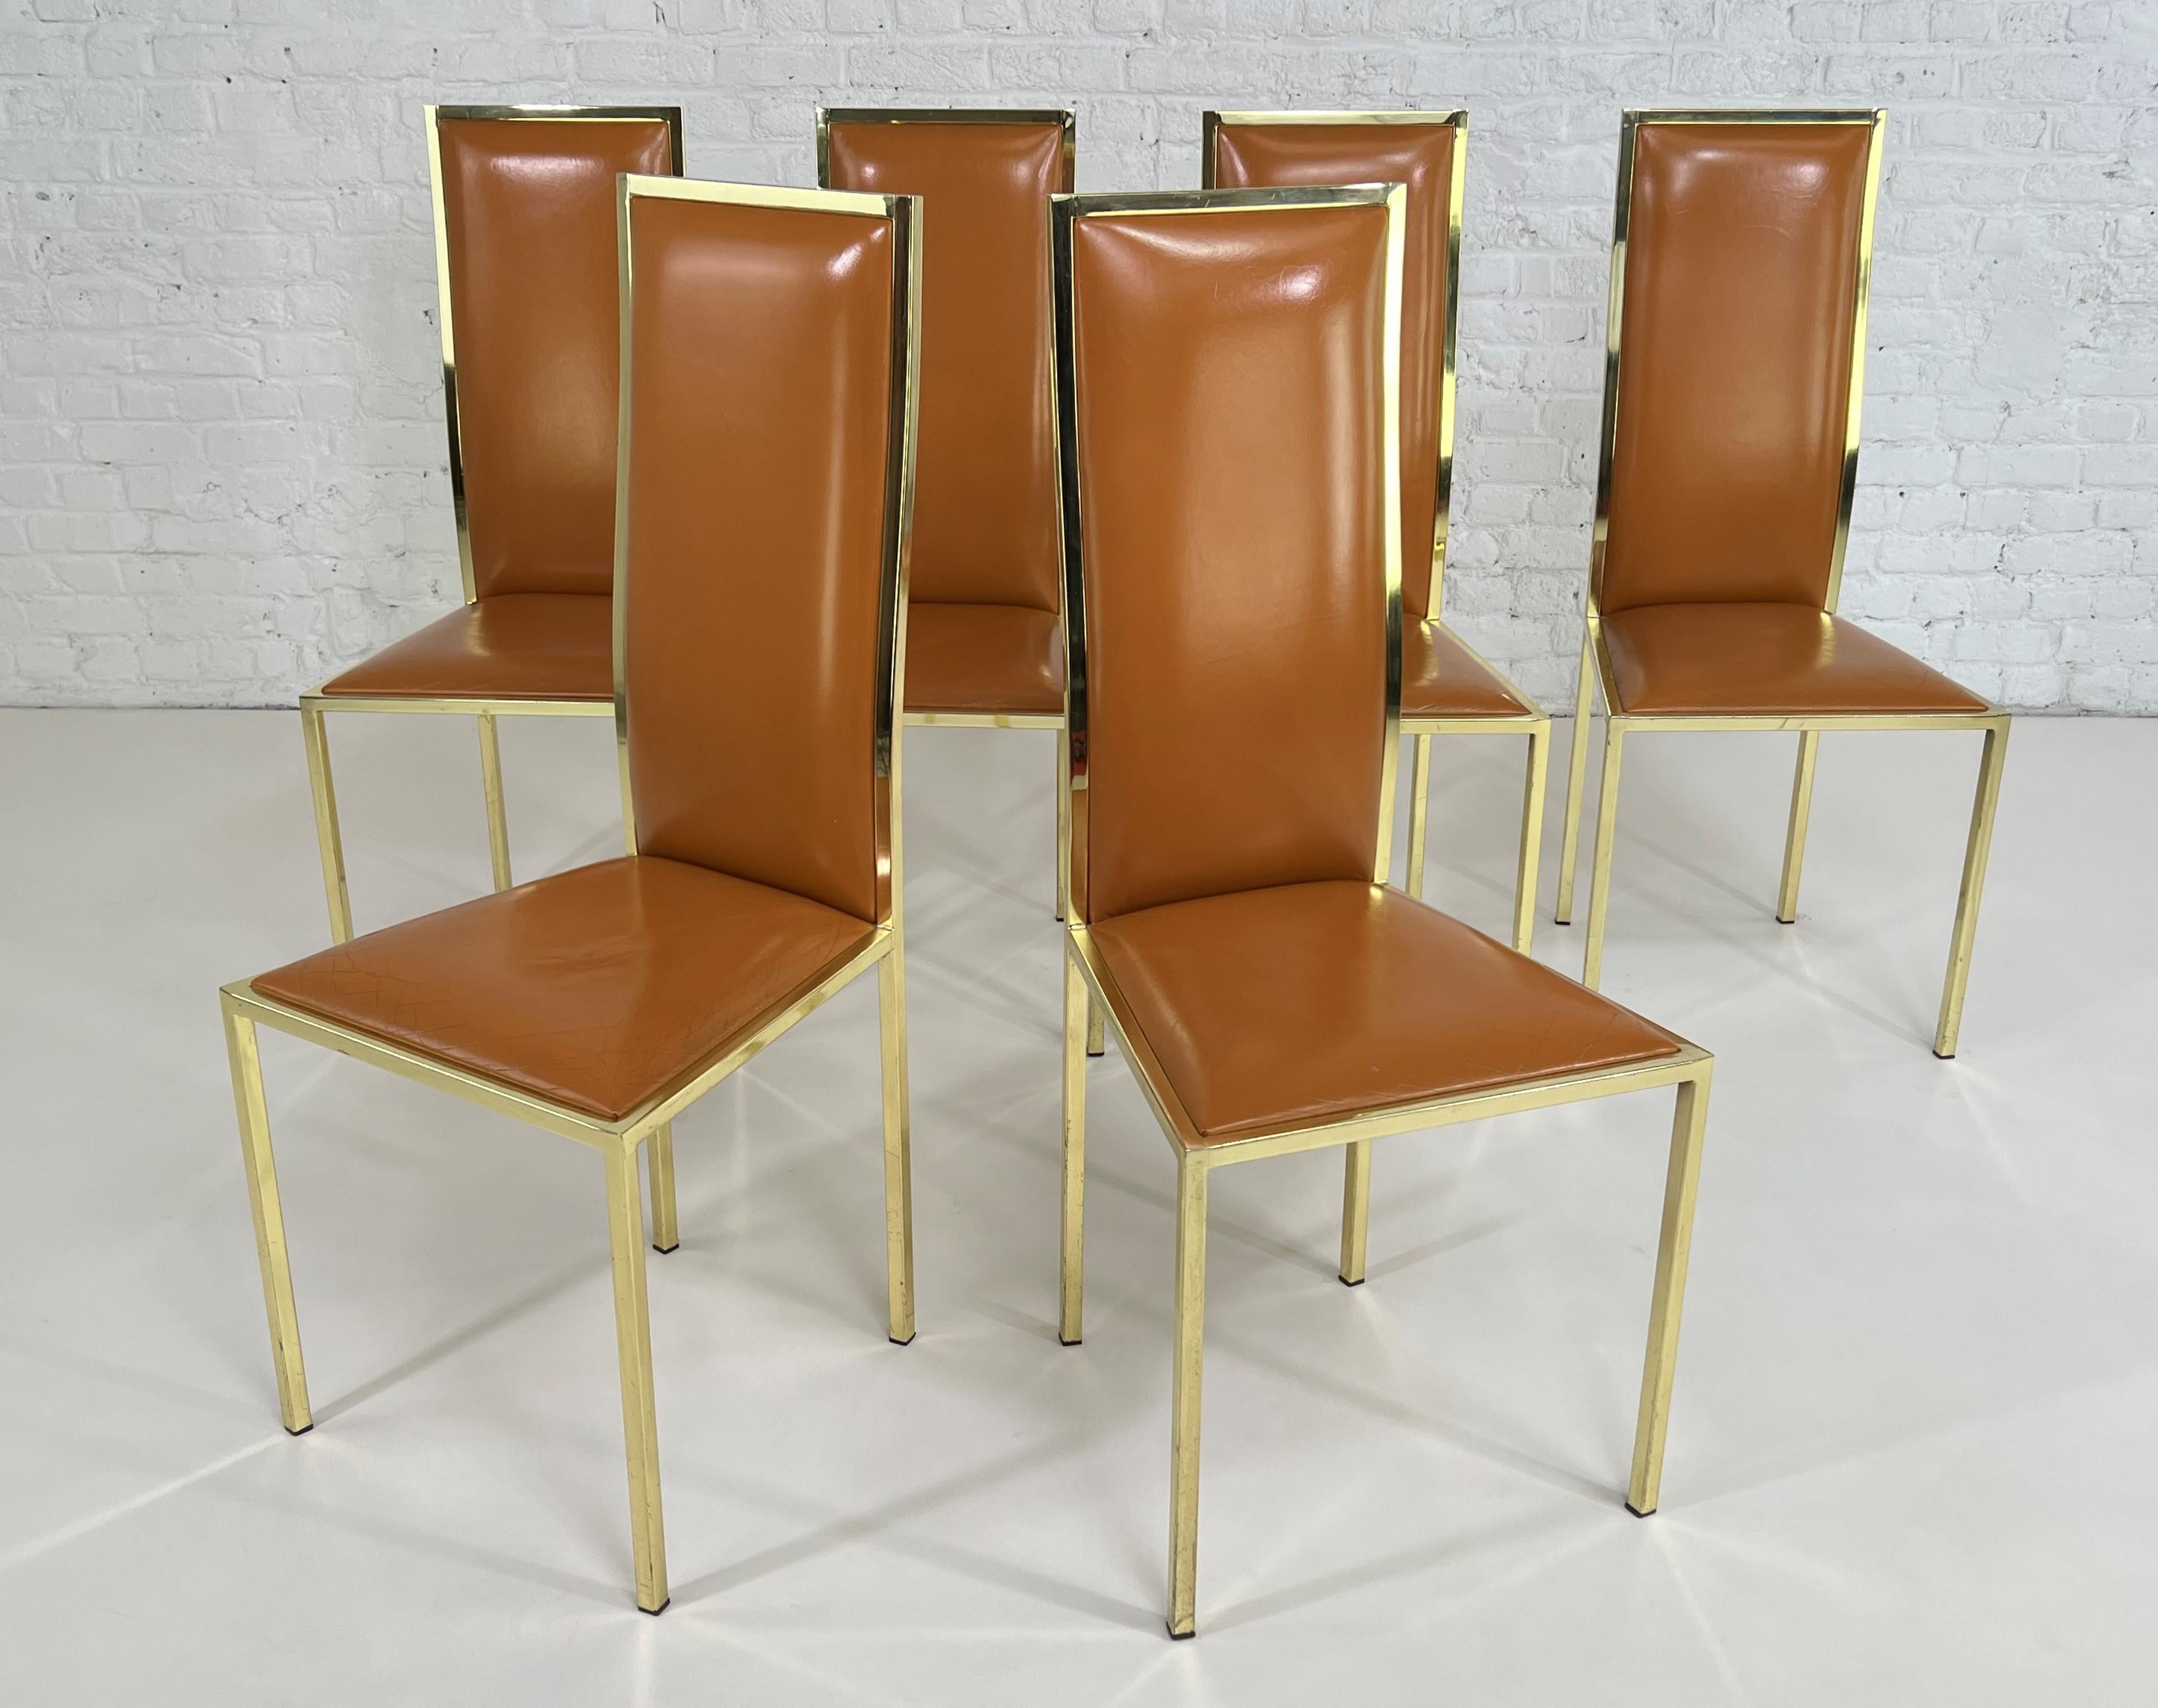 1970s Italian Style Renato Zevi Design Cognac Leather And Brass Set of 6 Chairs For Sale 2